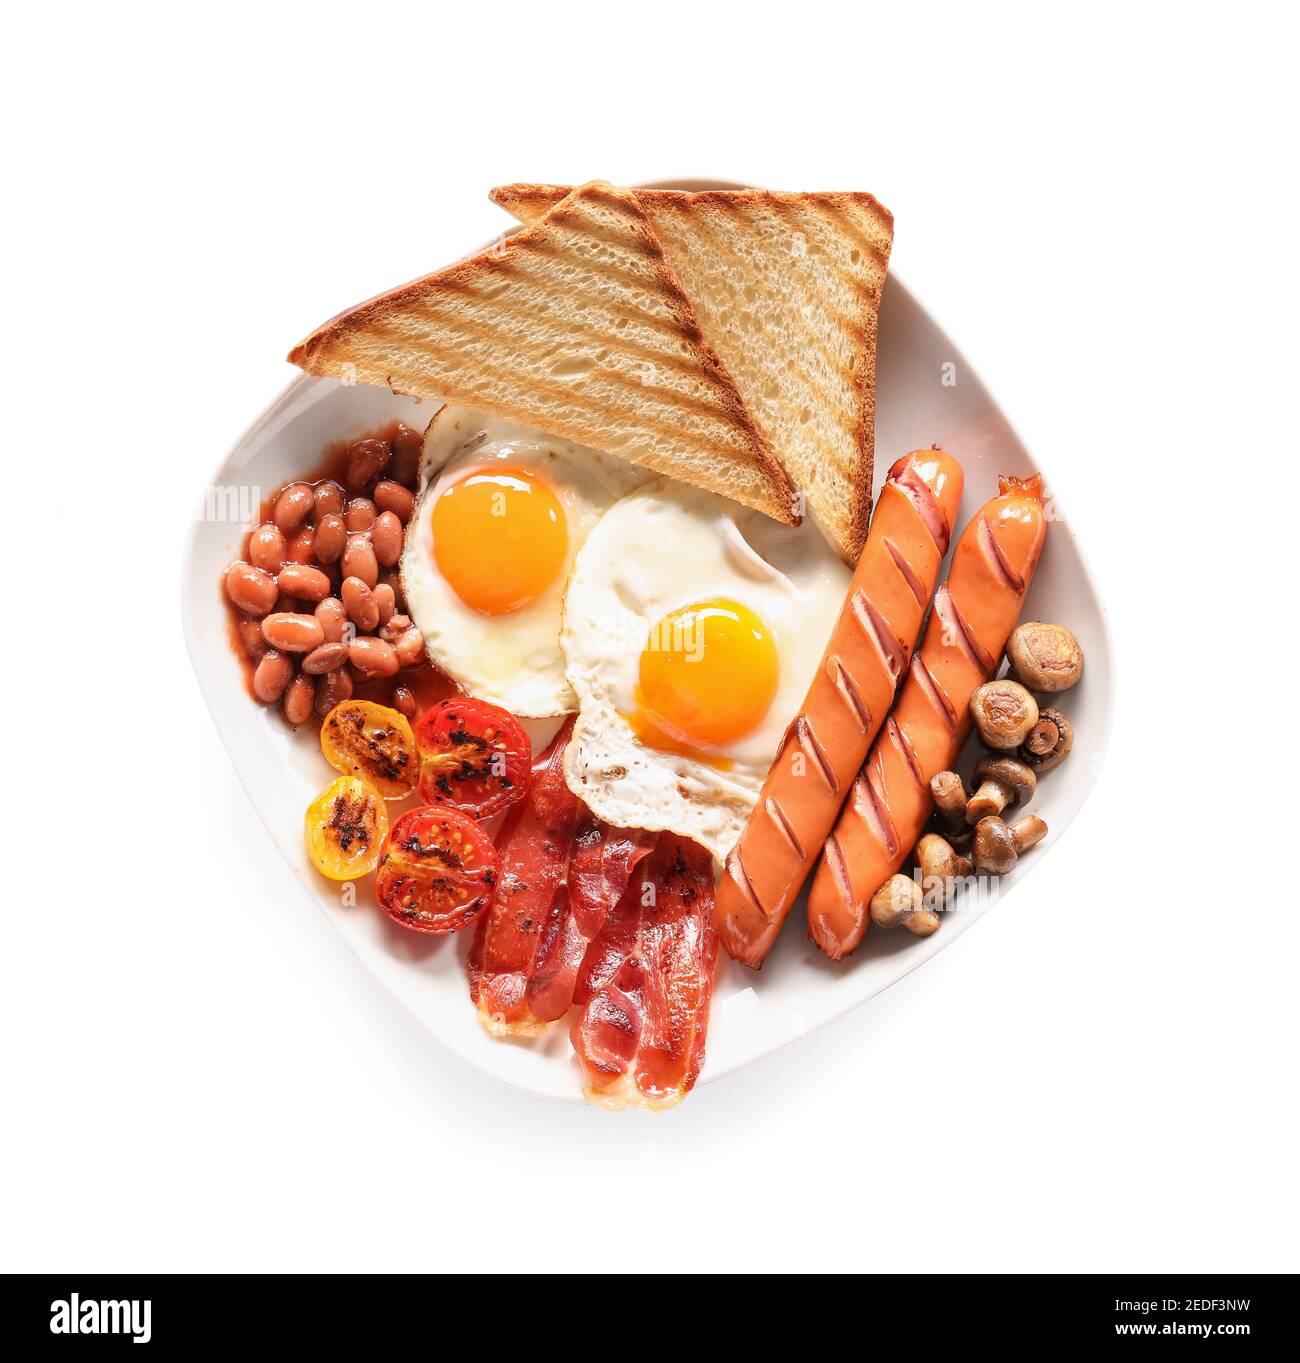 Traditional English breakfast with fried eggs in plate on white background  Stock Photo - Alamy